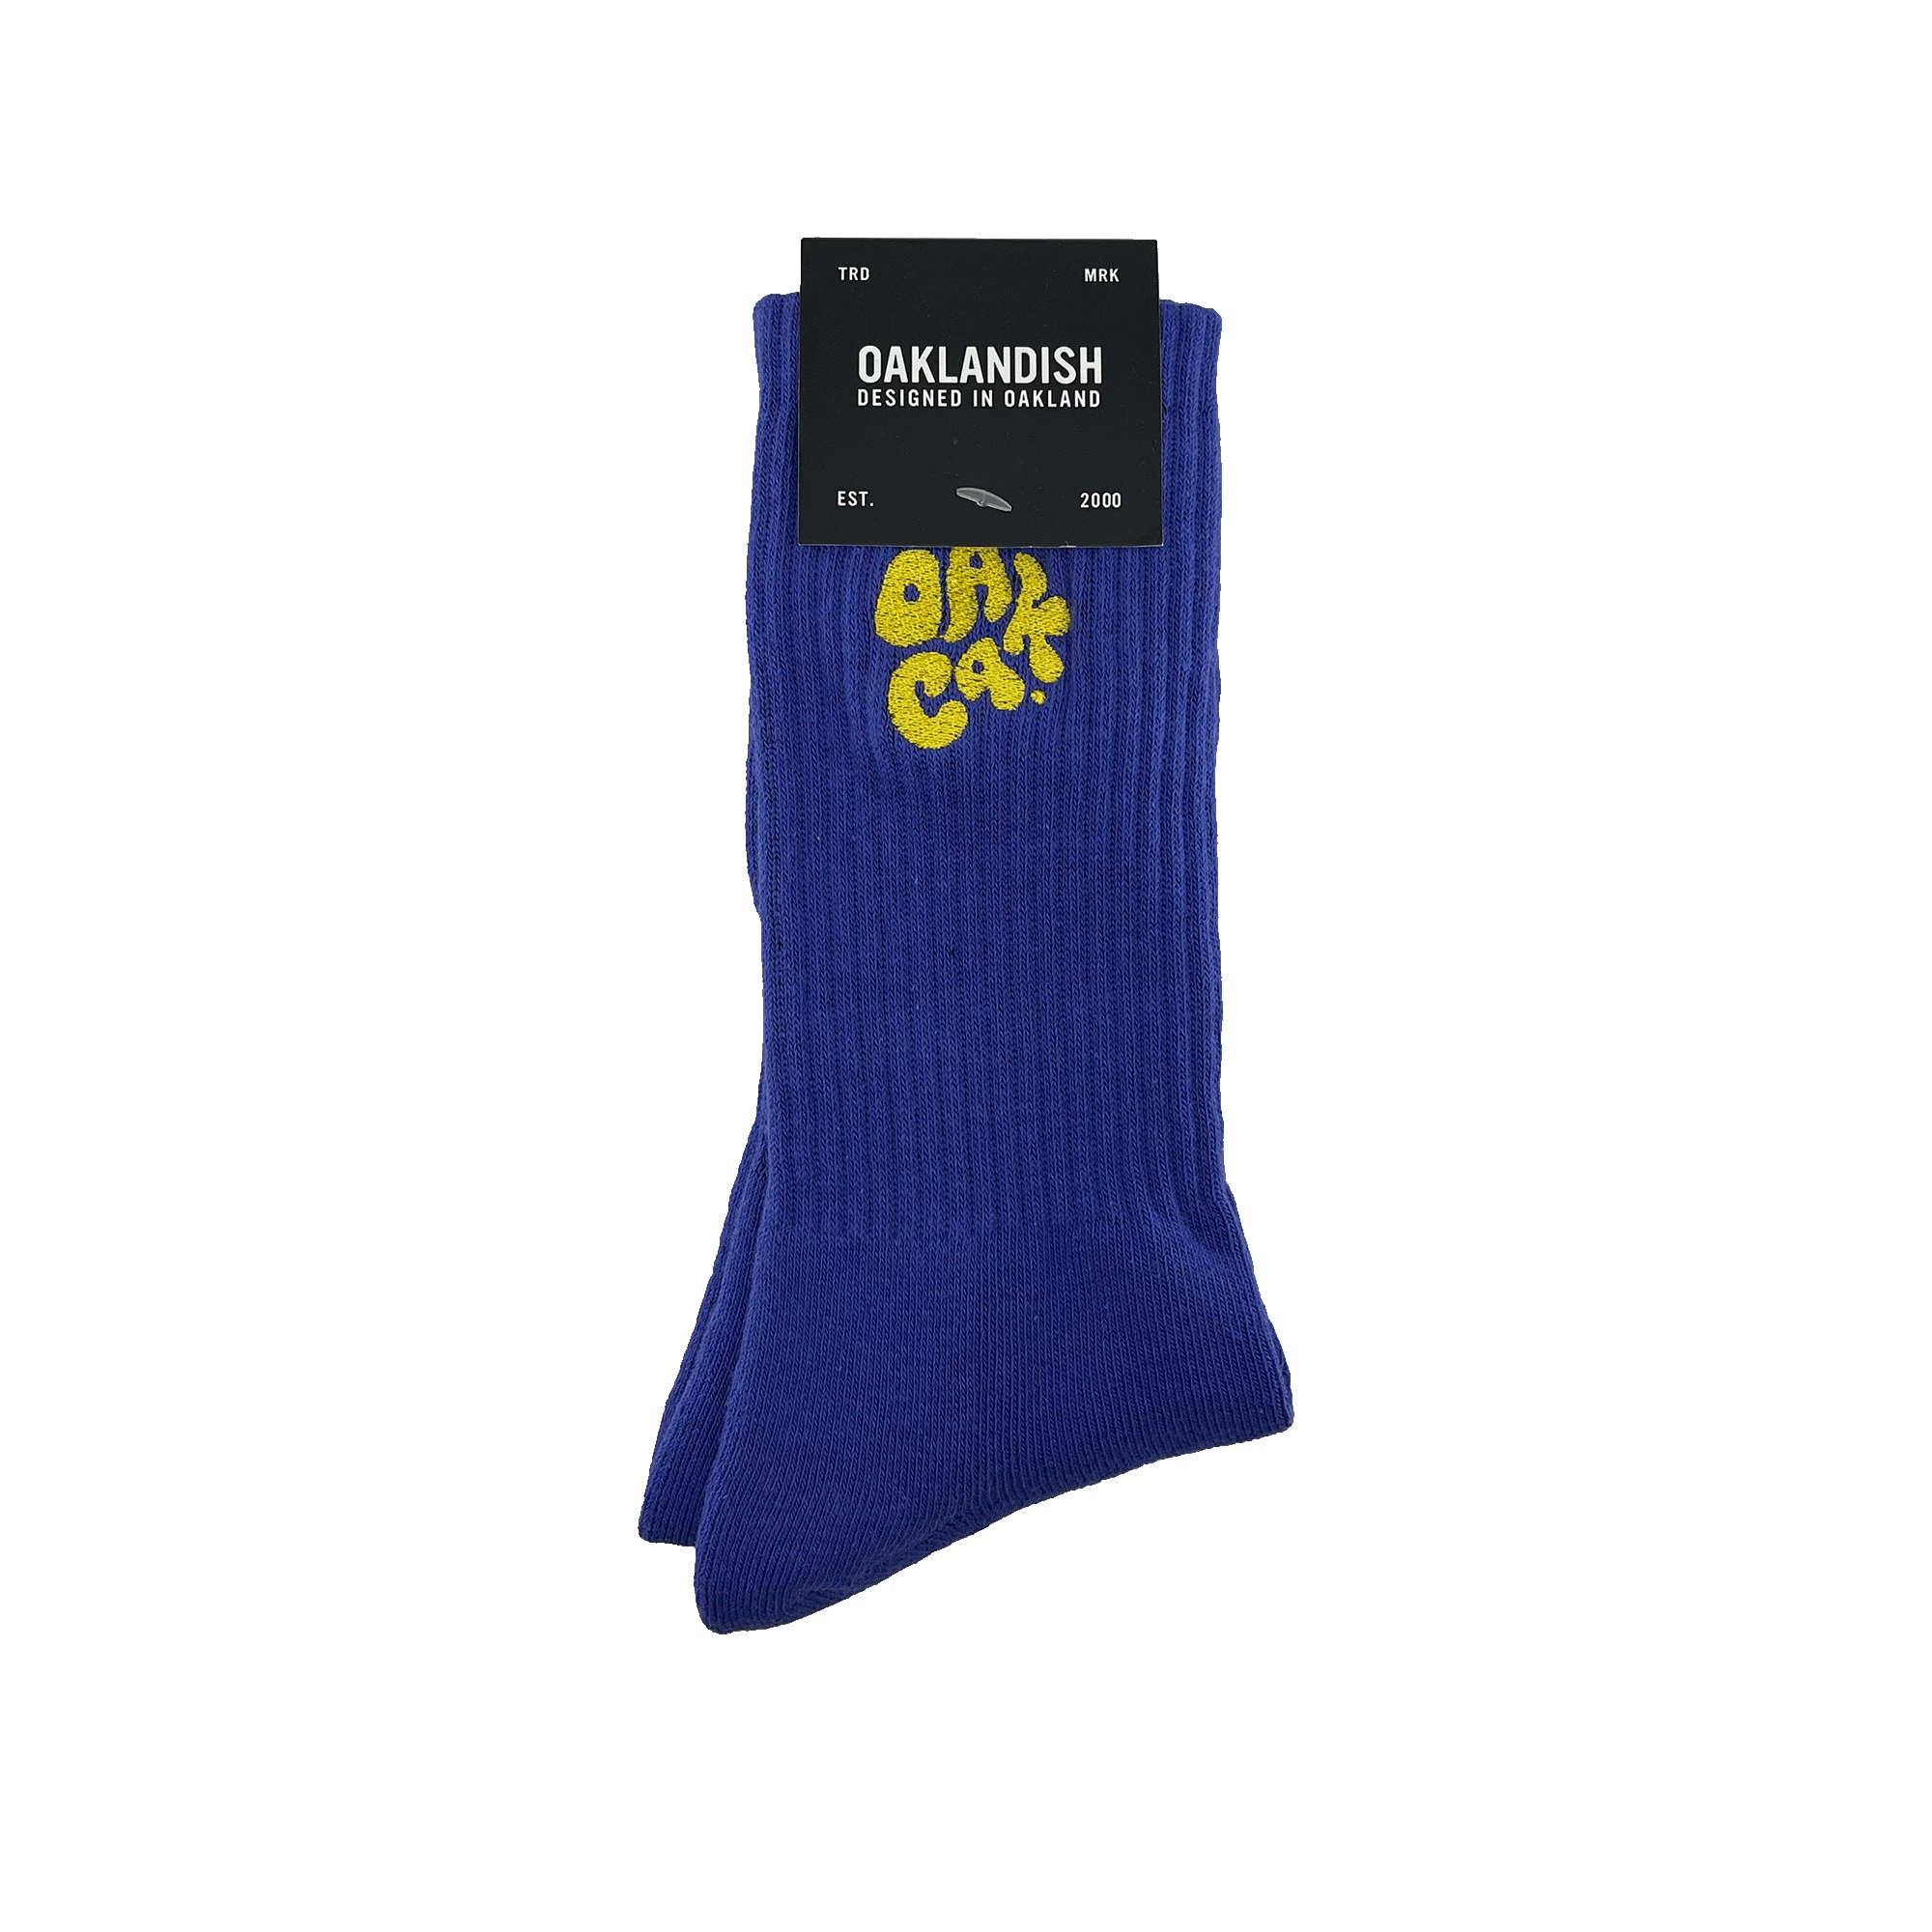 Pair folded blue crew socks in Oaklandish packaging with an embroidered yellow OAK CA blob-style wordmark.